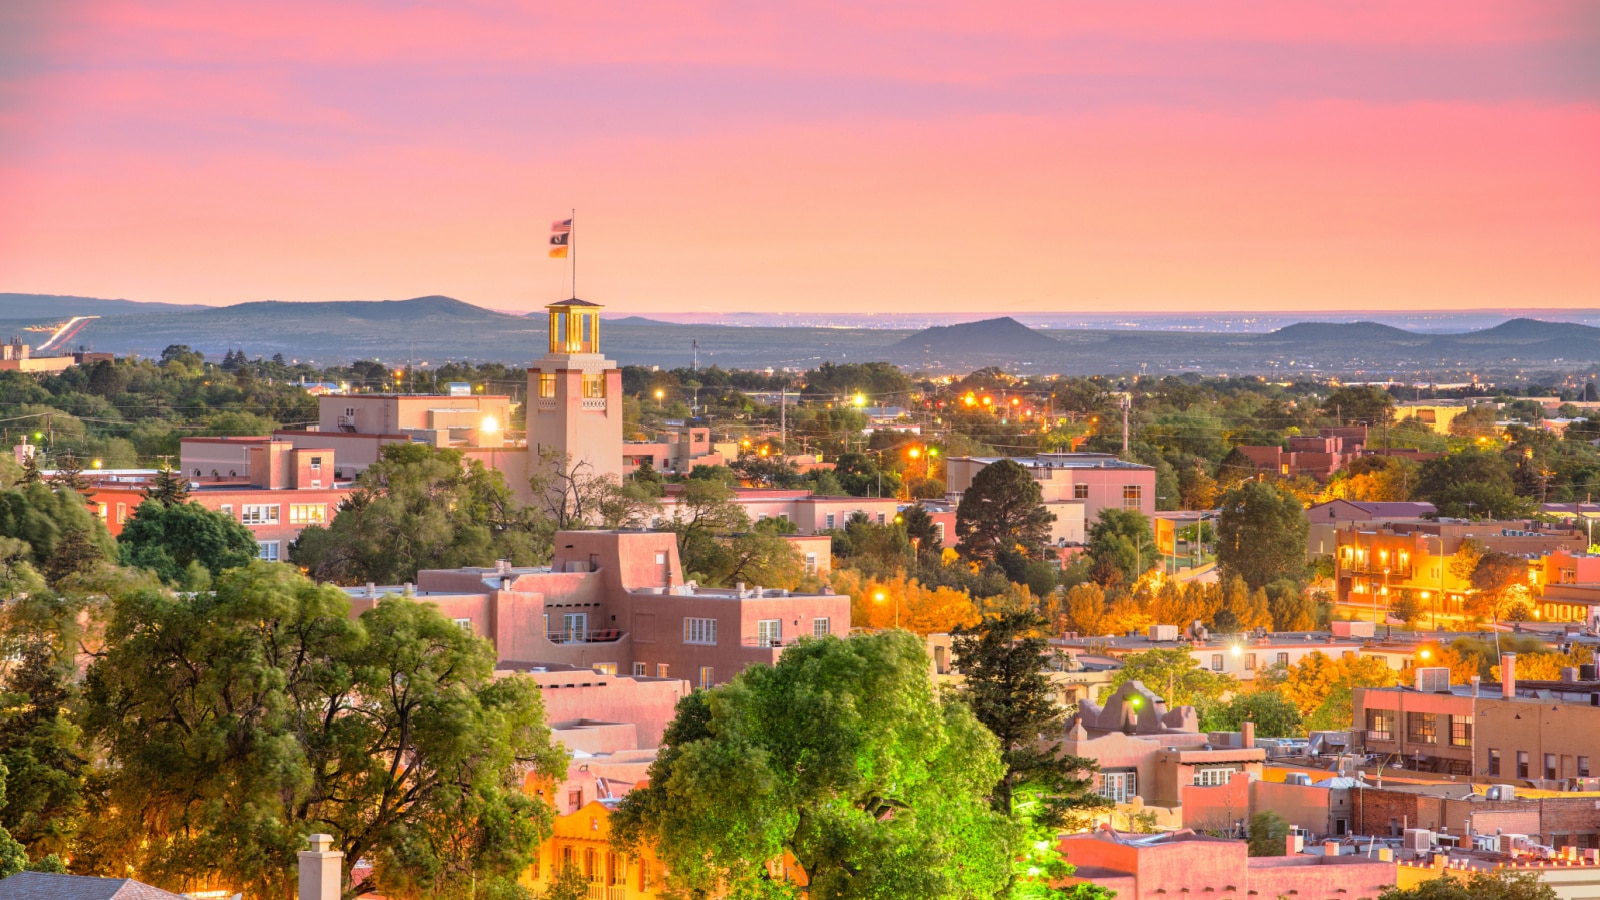 <p>Santa Fe’s adobe architecture, artistic culture, and stunning desert landscapes make it one of the prettiest cities in the Southwest.</p>